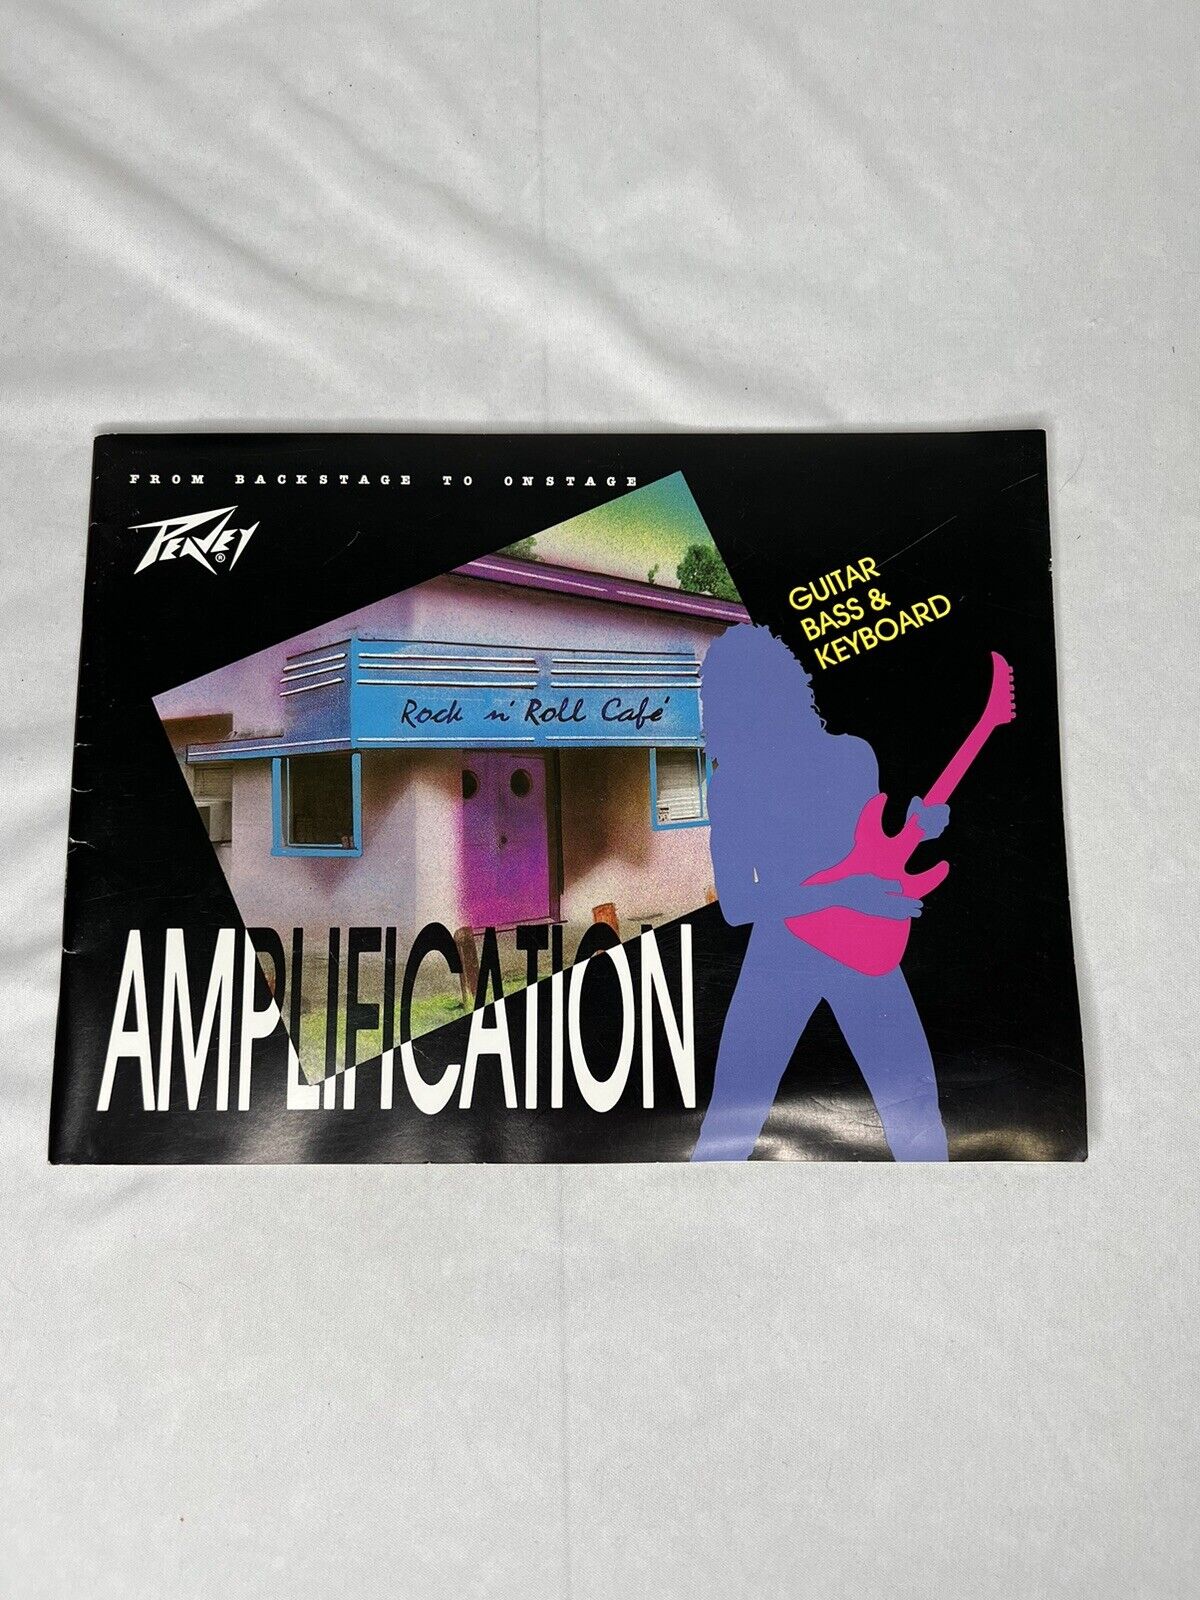 Peavey Vintage 1989 Amplification Catalog Guitar, Bass, and Keybord Amplifiers